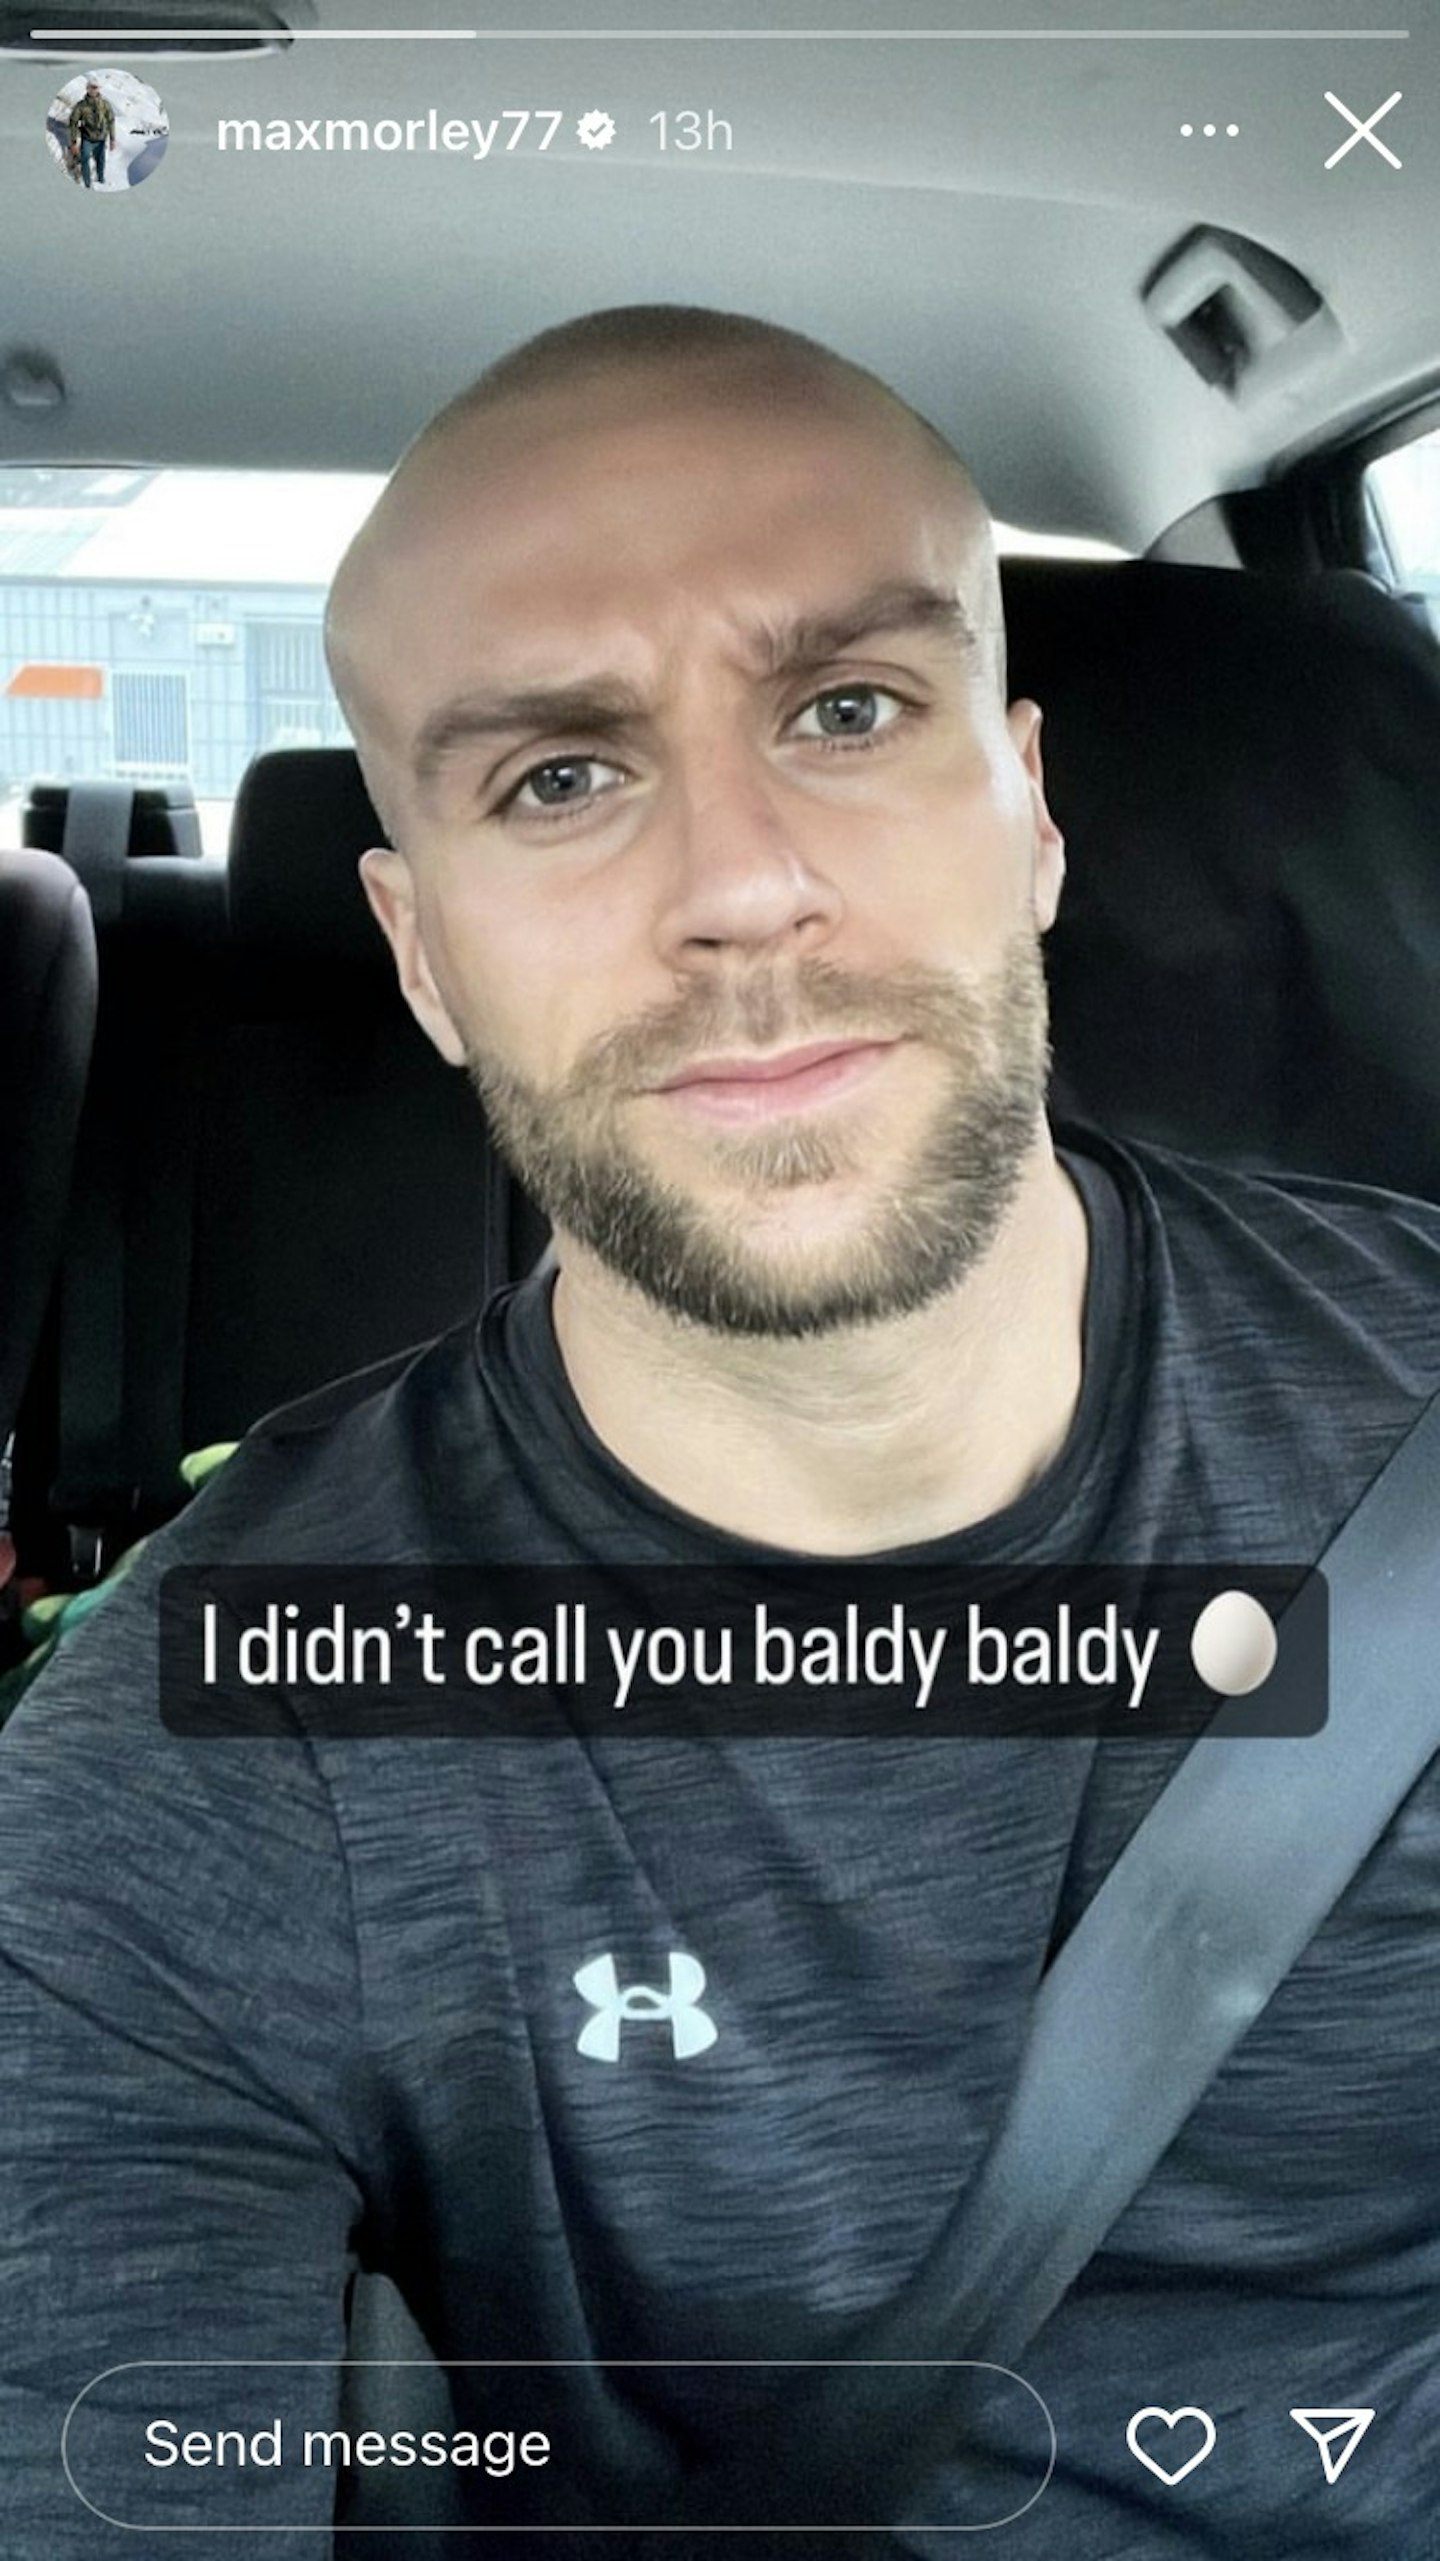 A selfie of Max Morley with no hair taken from his Instagram story